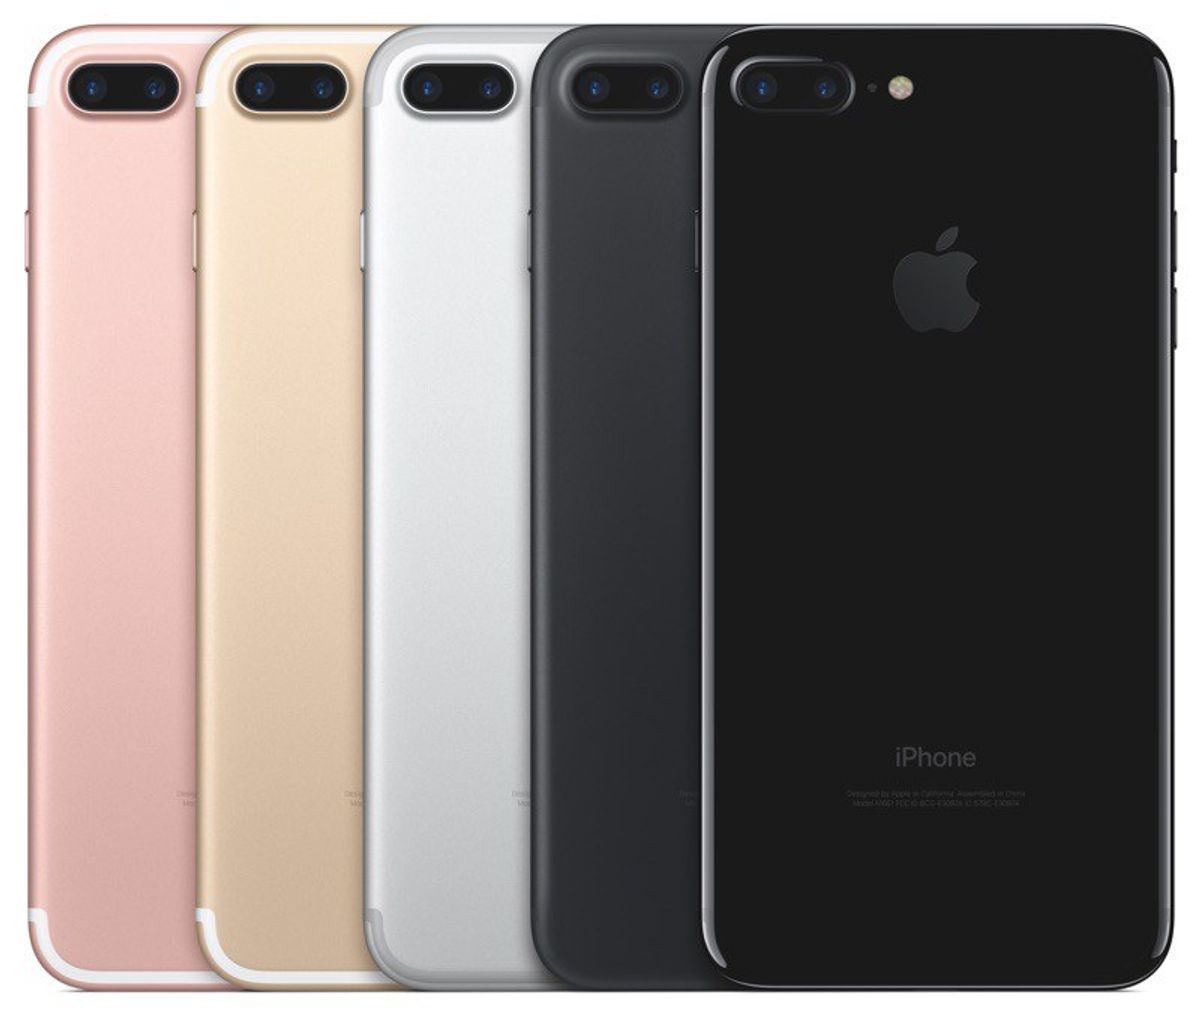 Glitch Or Trick: Apple’s Older Model iPhones And The Release Of The iPhone 7